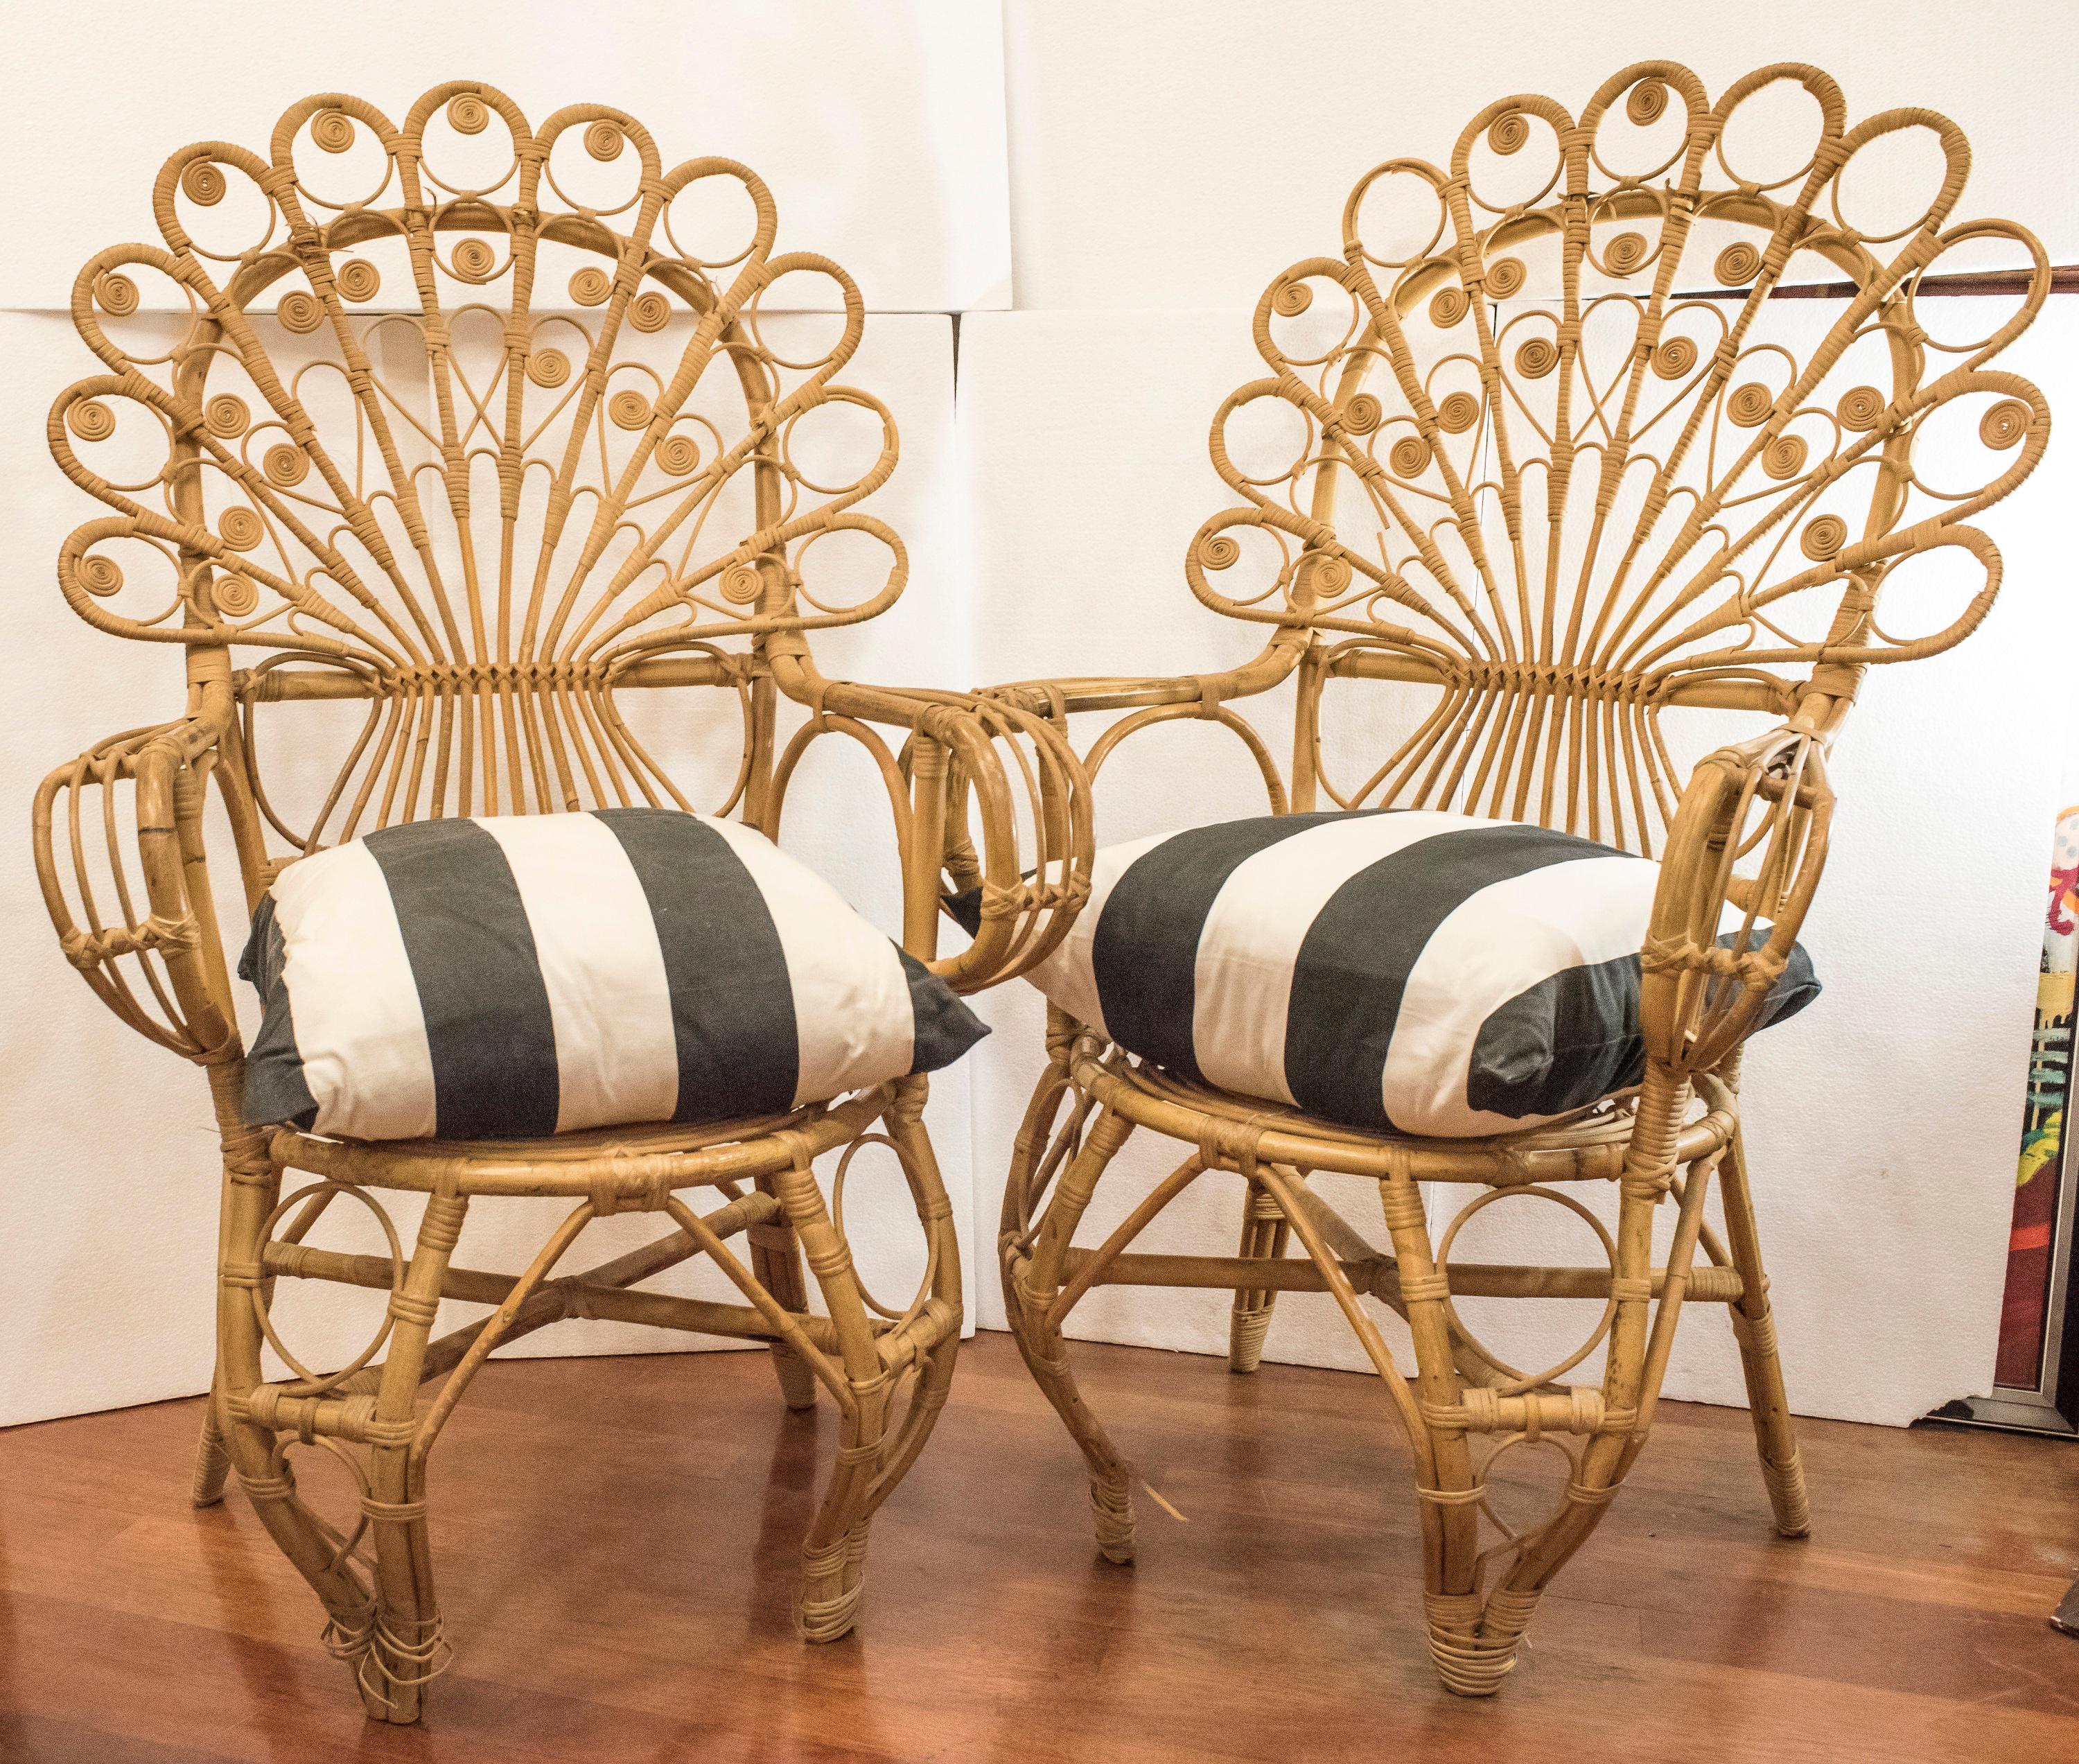 Amazing and rare couple of Spanish wicker armchairs .They are in very good condition with age and use, only a few little ornamental losses but the structure and the seat in perfect condition. They are really a delightful works of crafts, and sadly